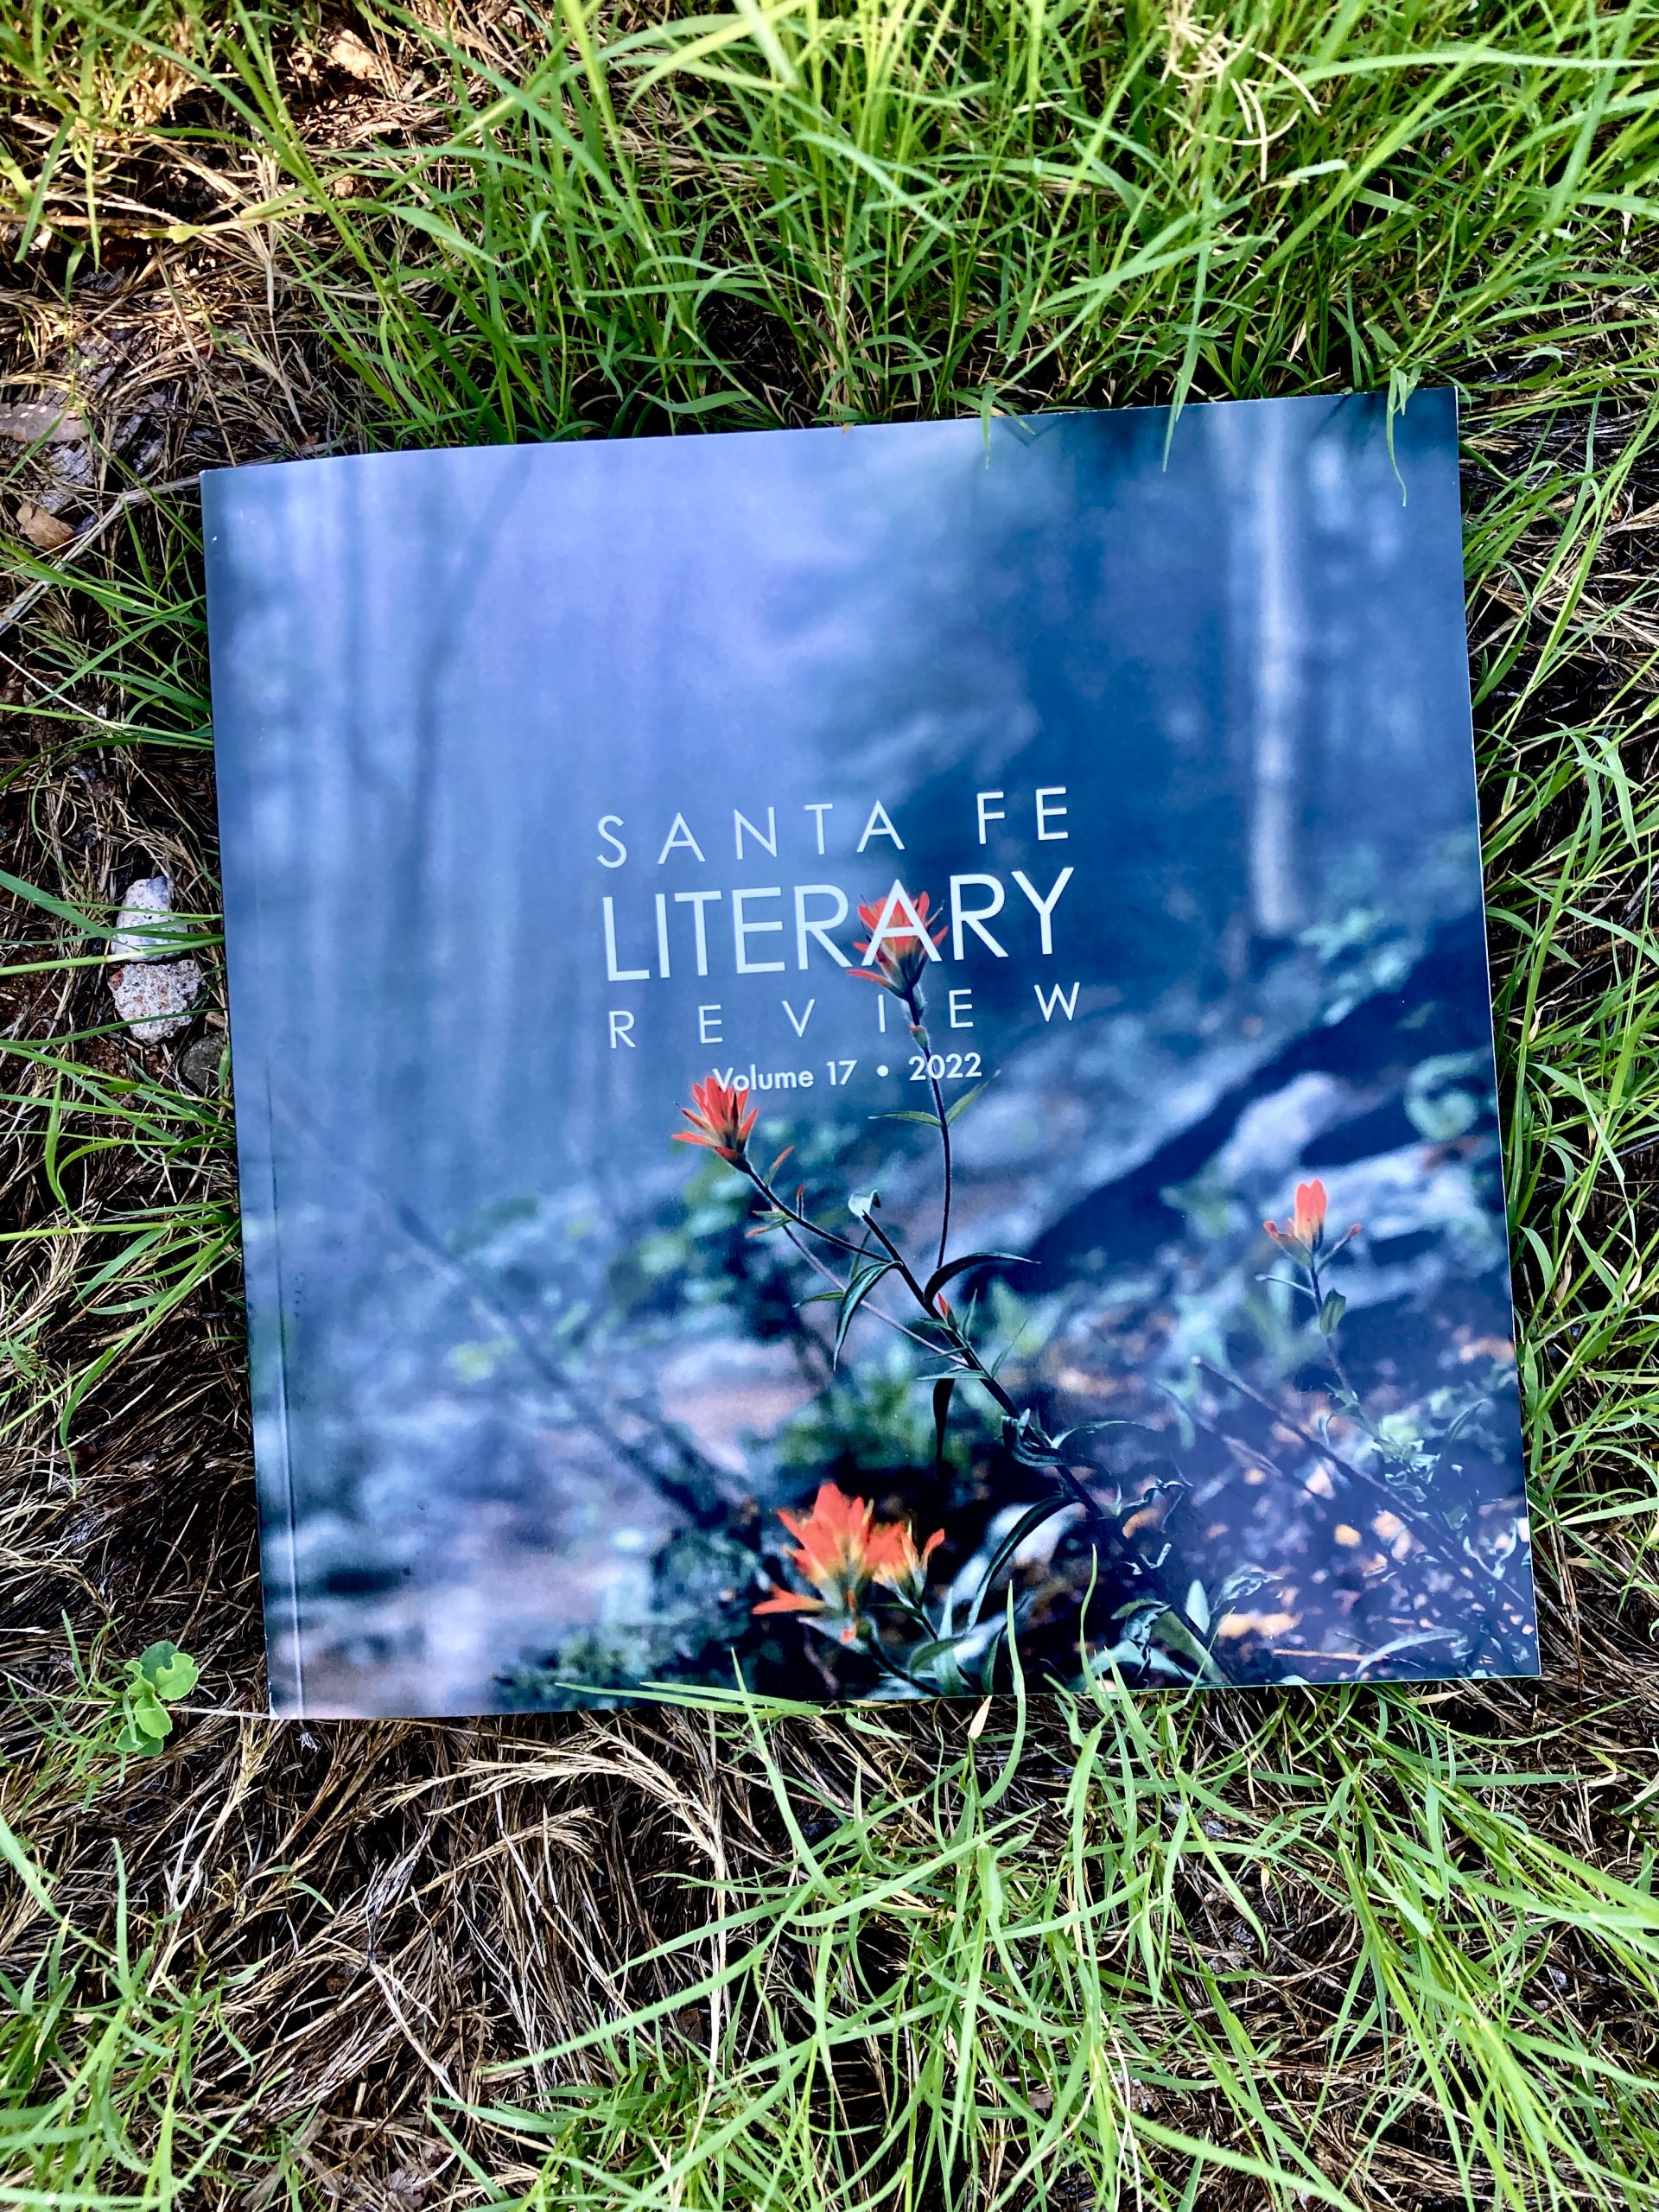 2022 LITERARY REVIEW Released!